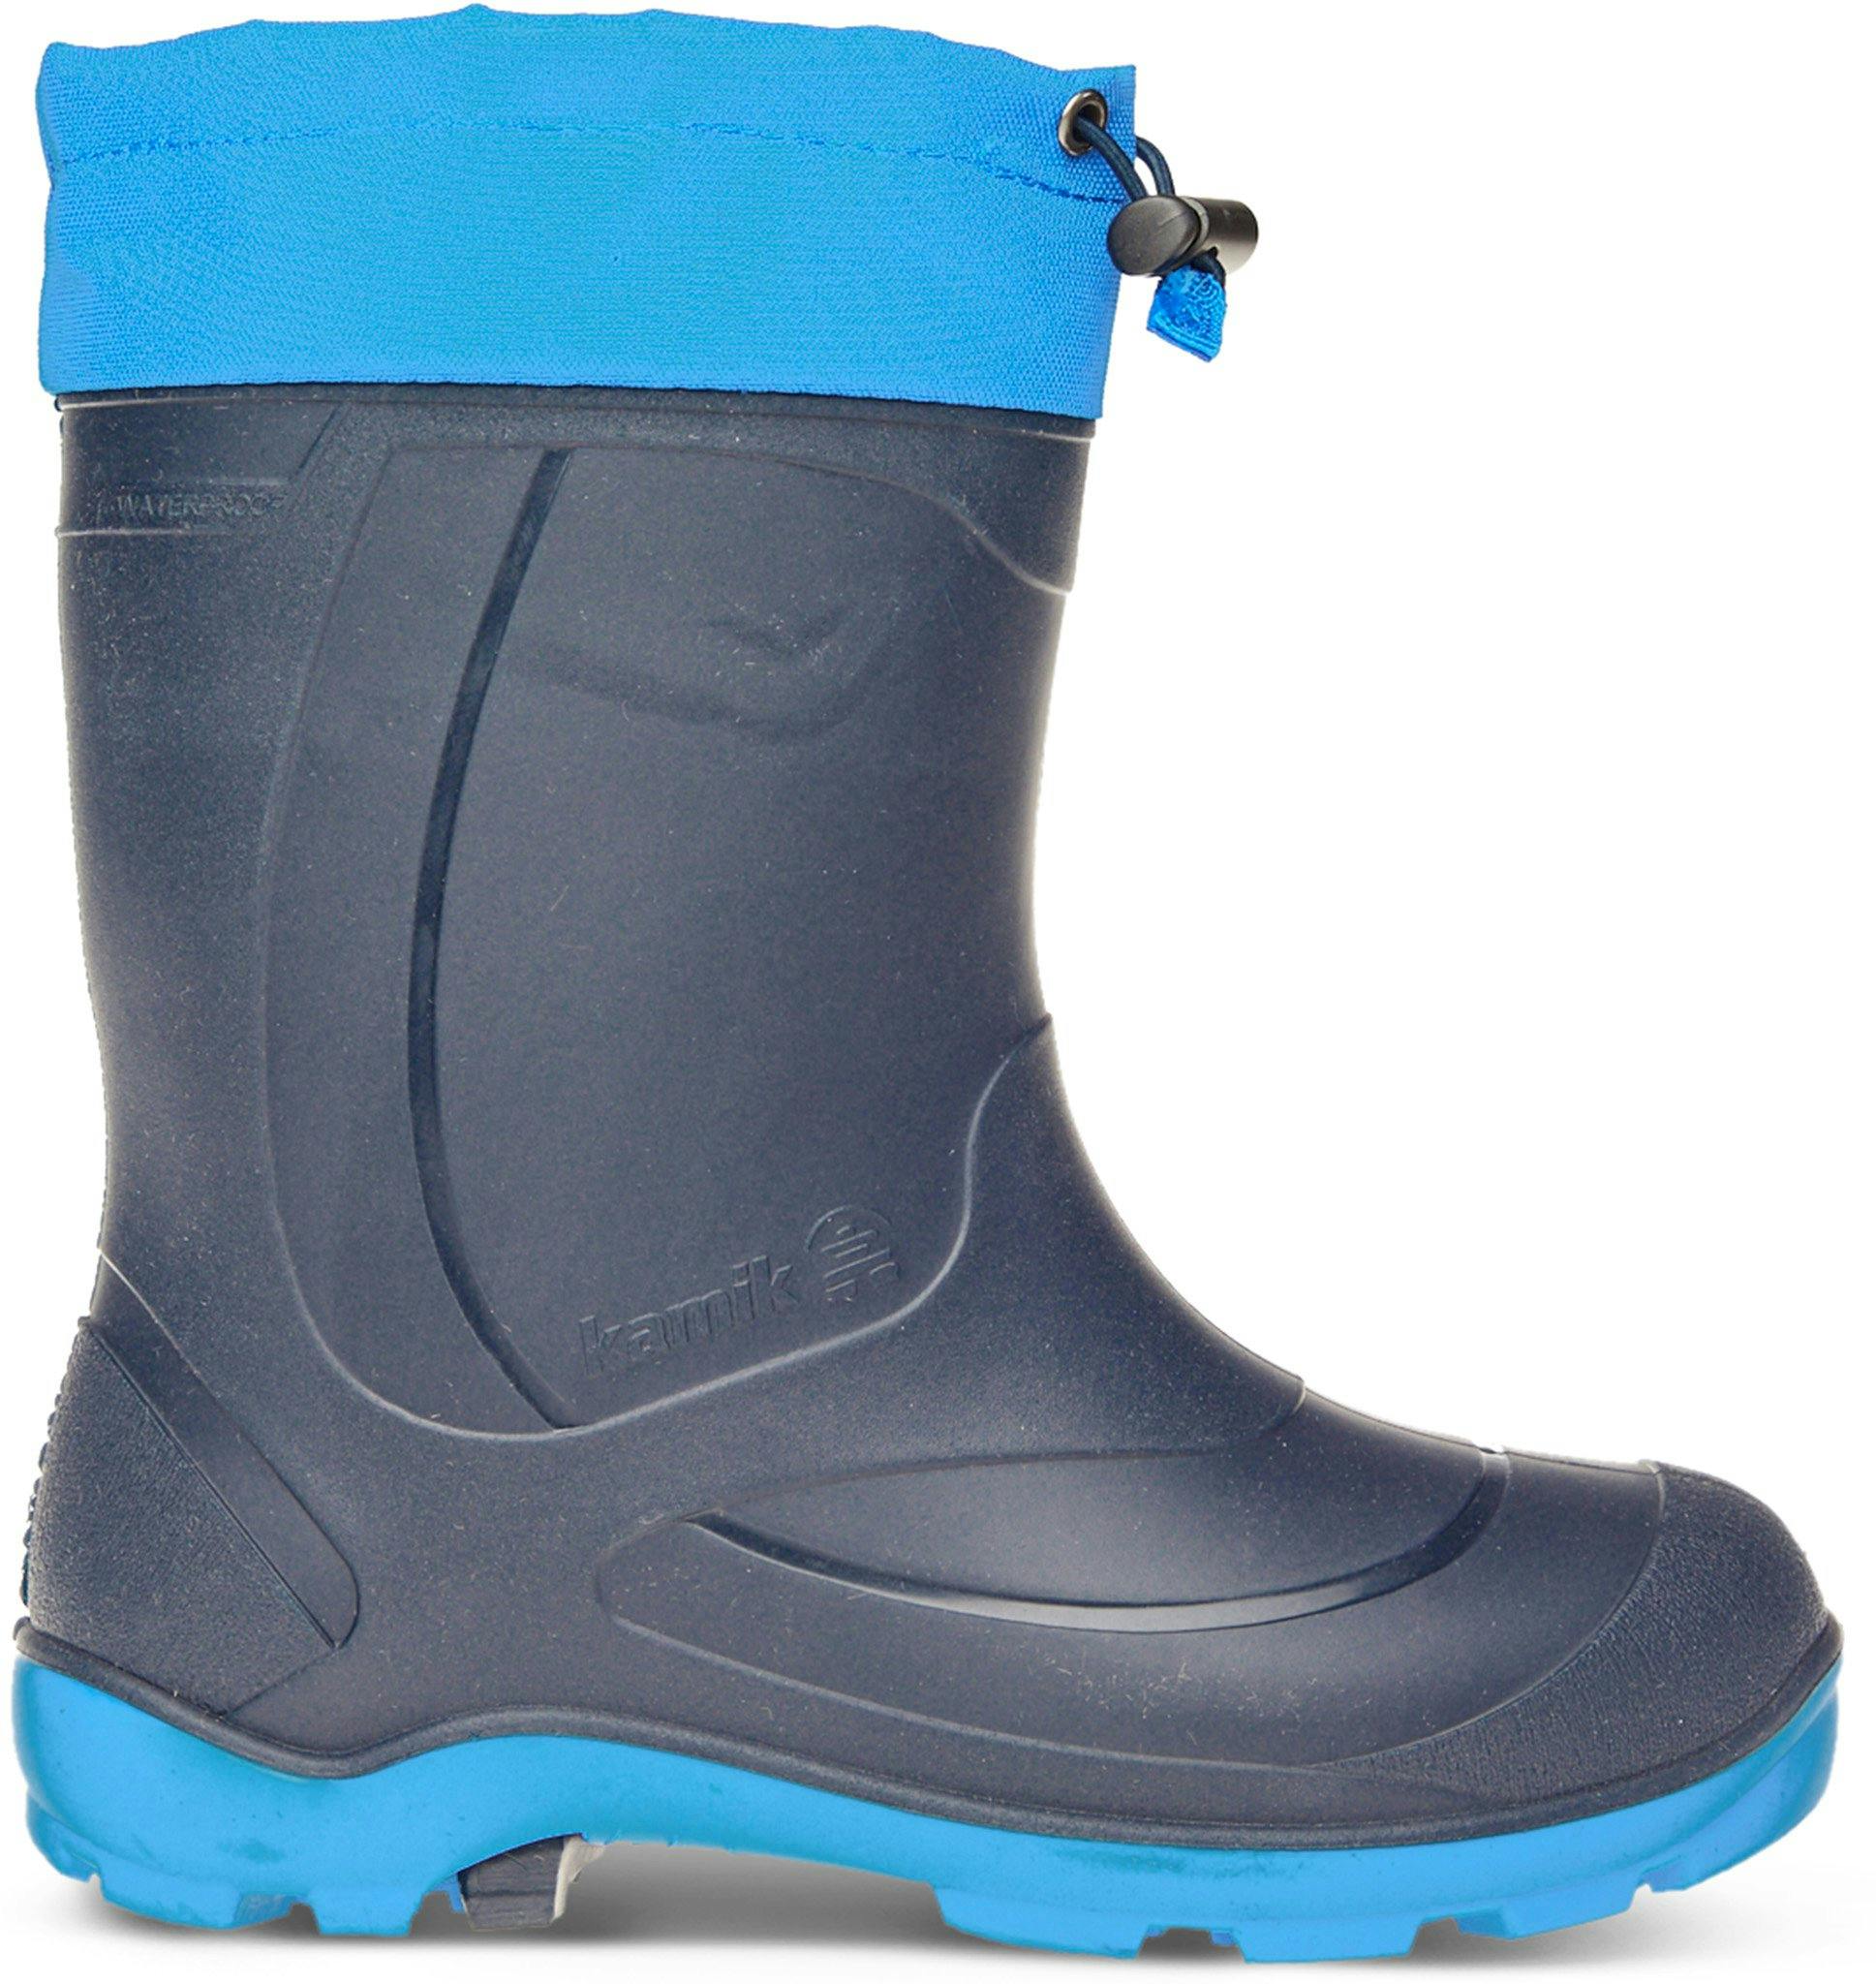 Product image for Snobuster 1 Winter Boots - Big Kids